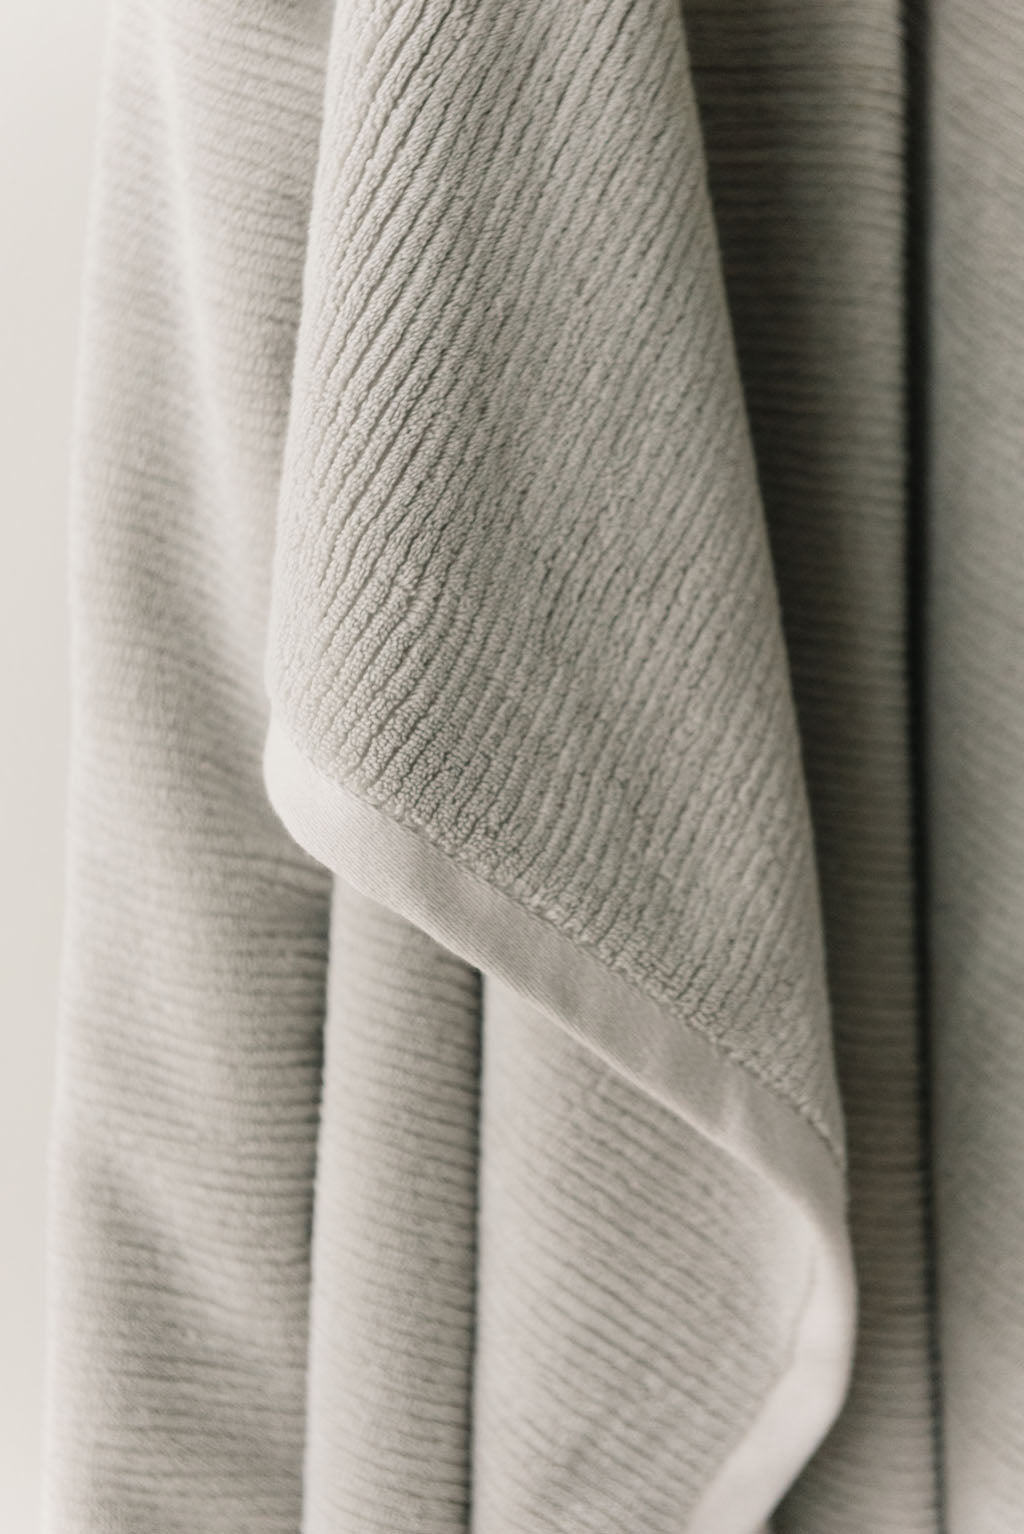 Ribbed Terry Bath Sheets - Set of 2 Towels | Cozy Earth